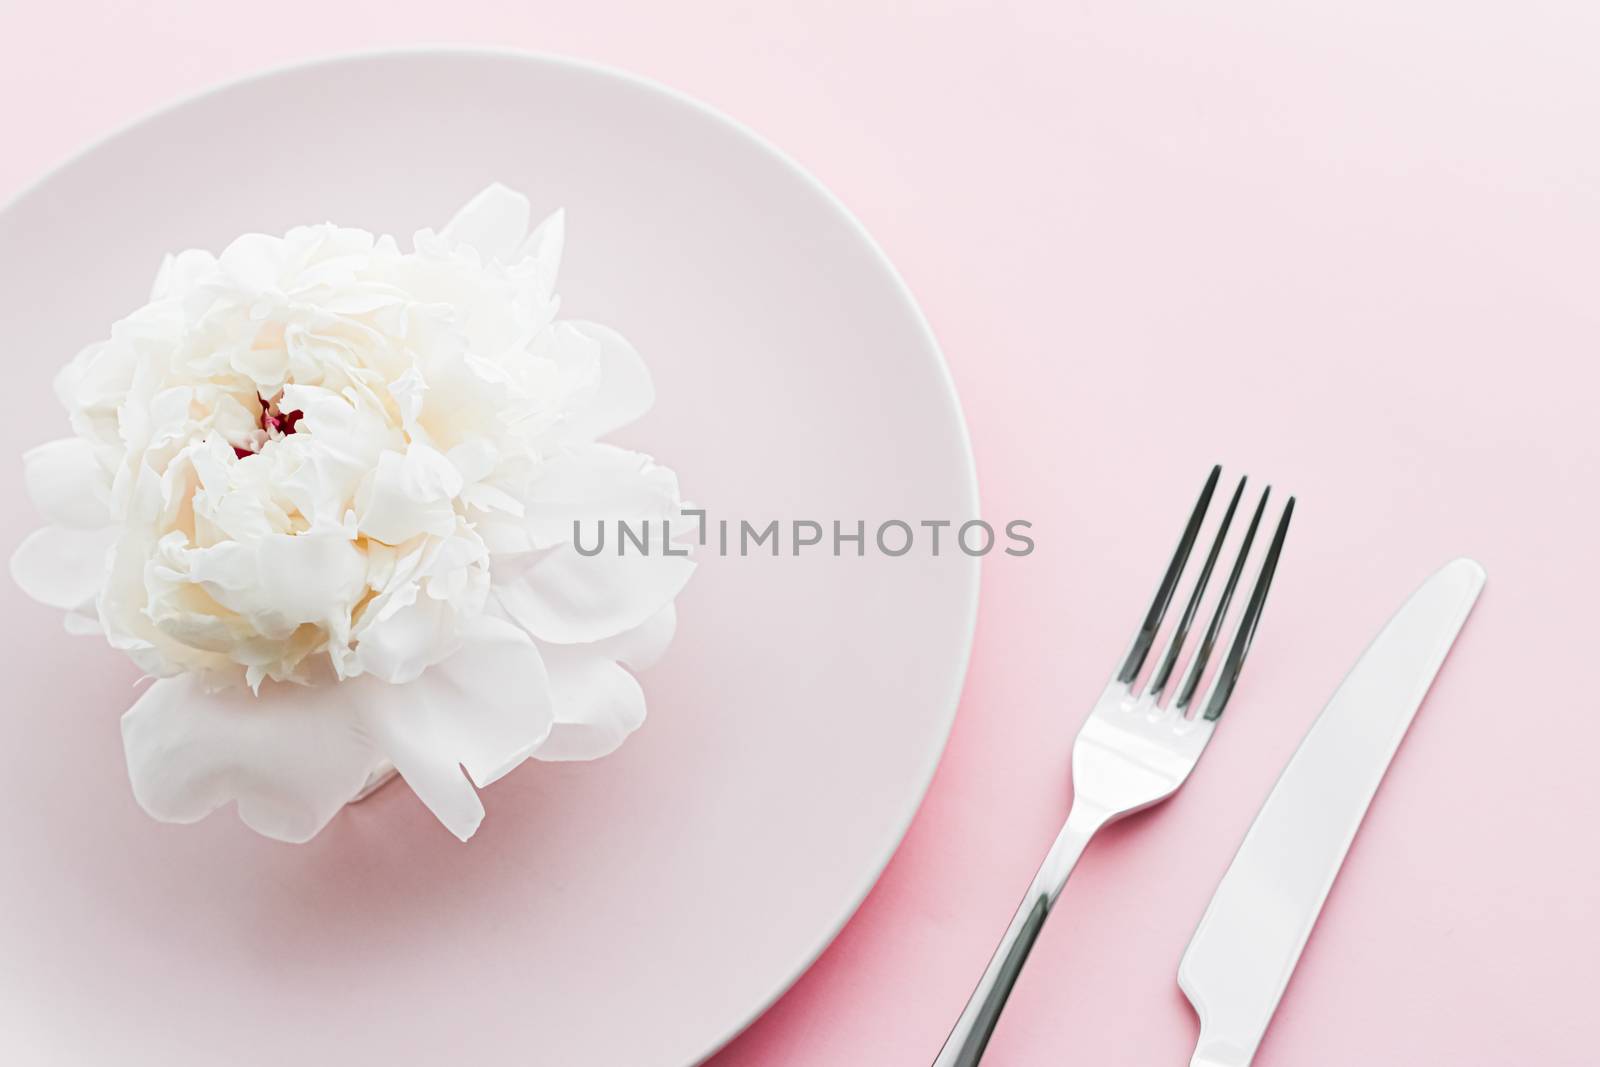 Dining plate and cutlery with peony flower as wedding decor set on pink background, top tableware for event decoration and dessert menu design